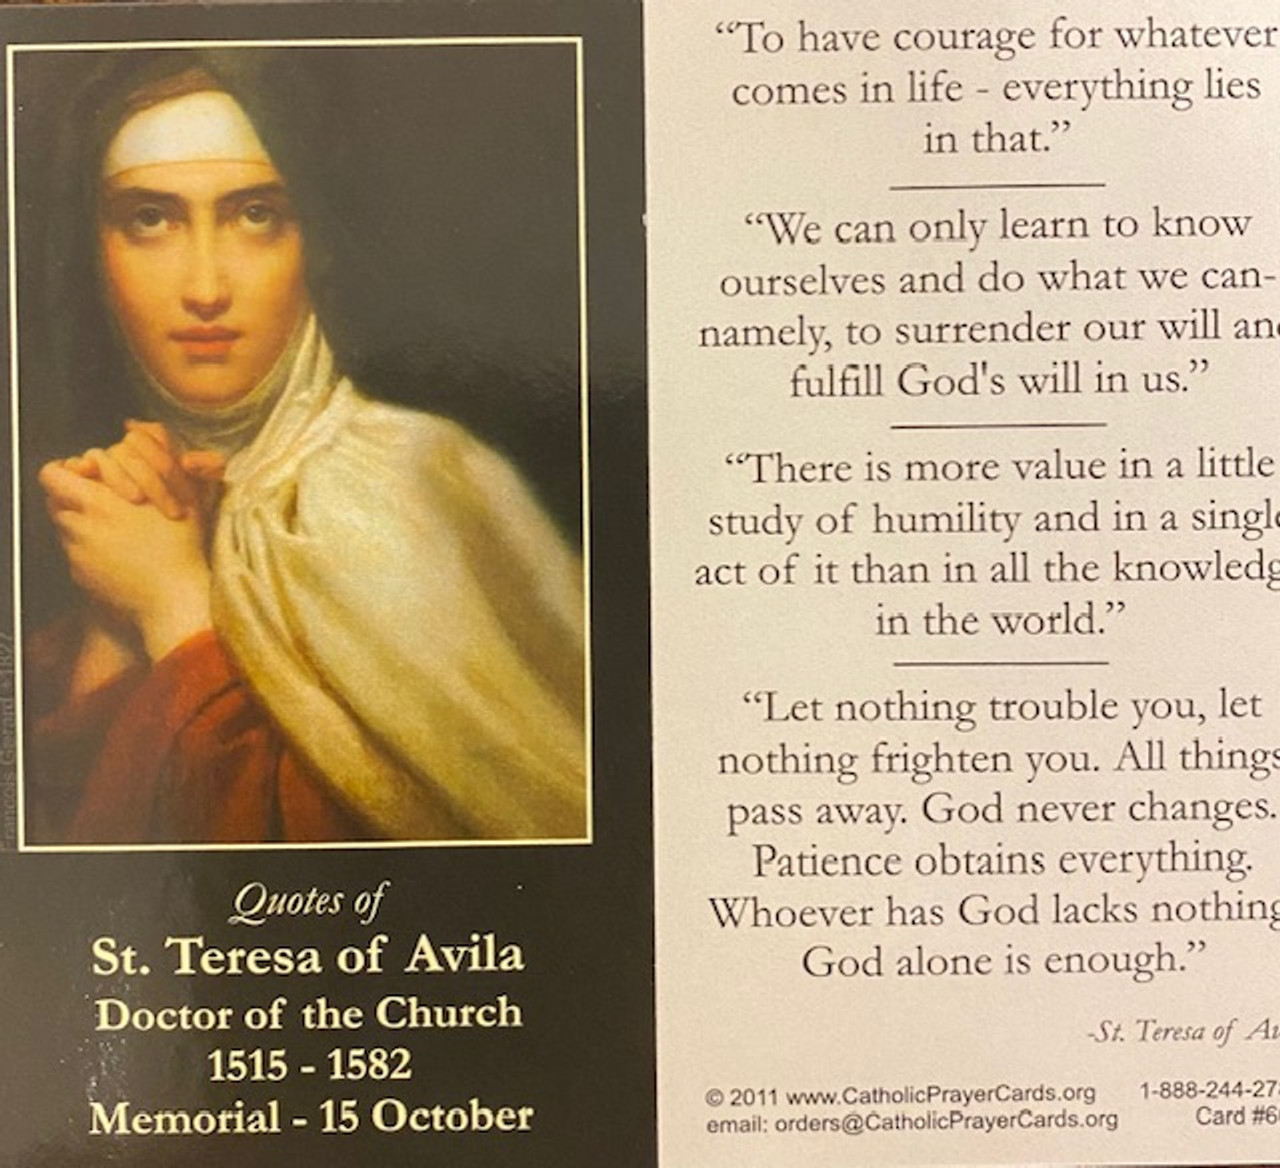 Teresa of Avila quote: When we accept what happens to us and make